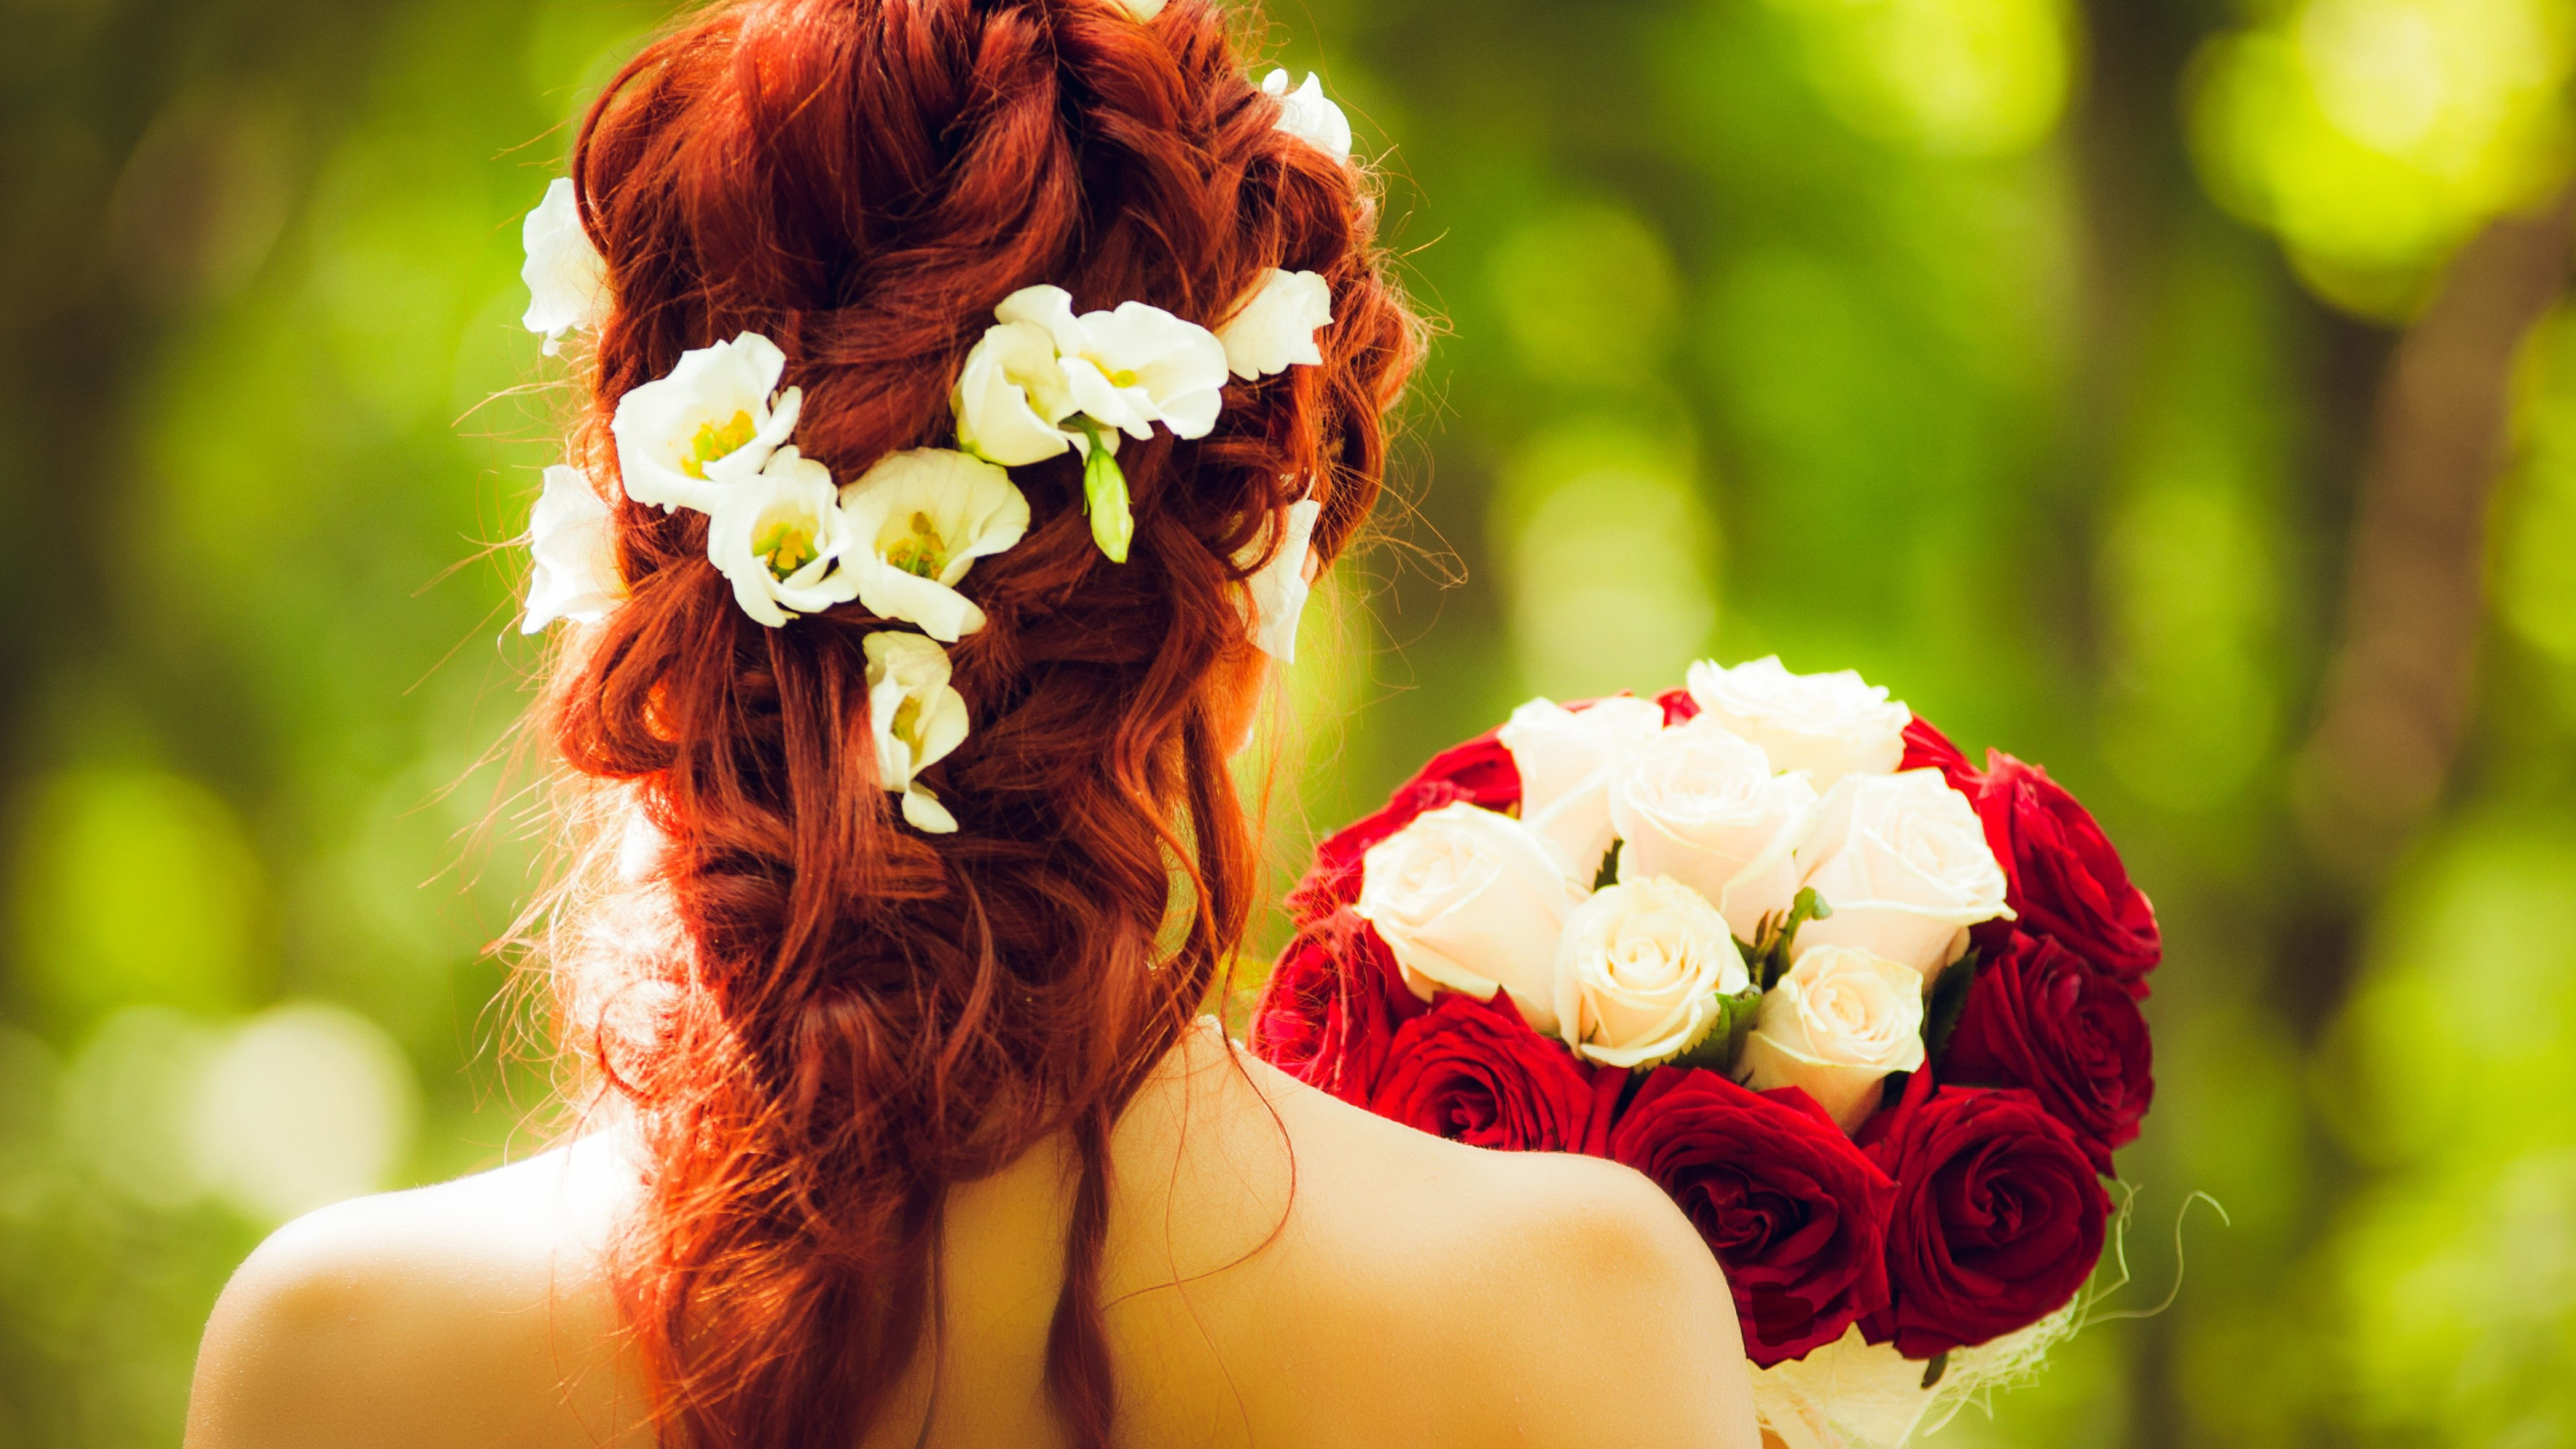 Bride and wedding flowers wallpaper 2880x1620